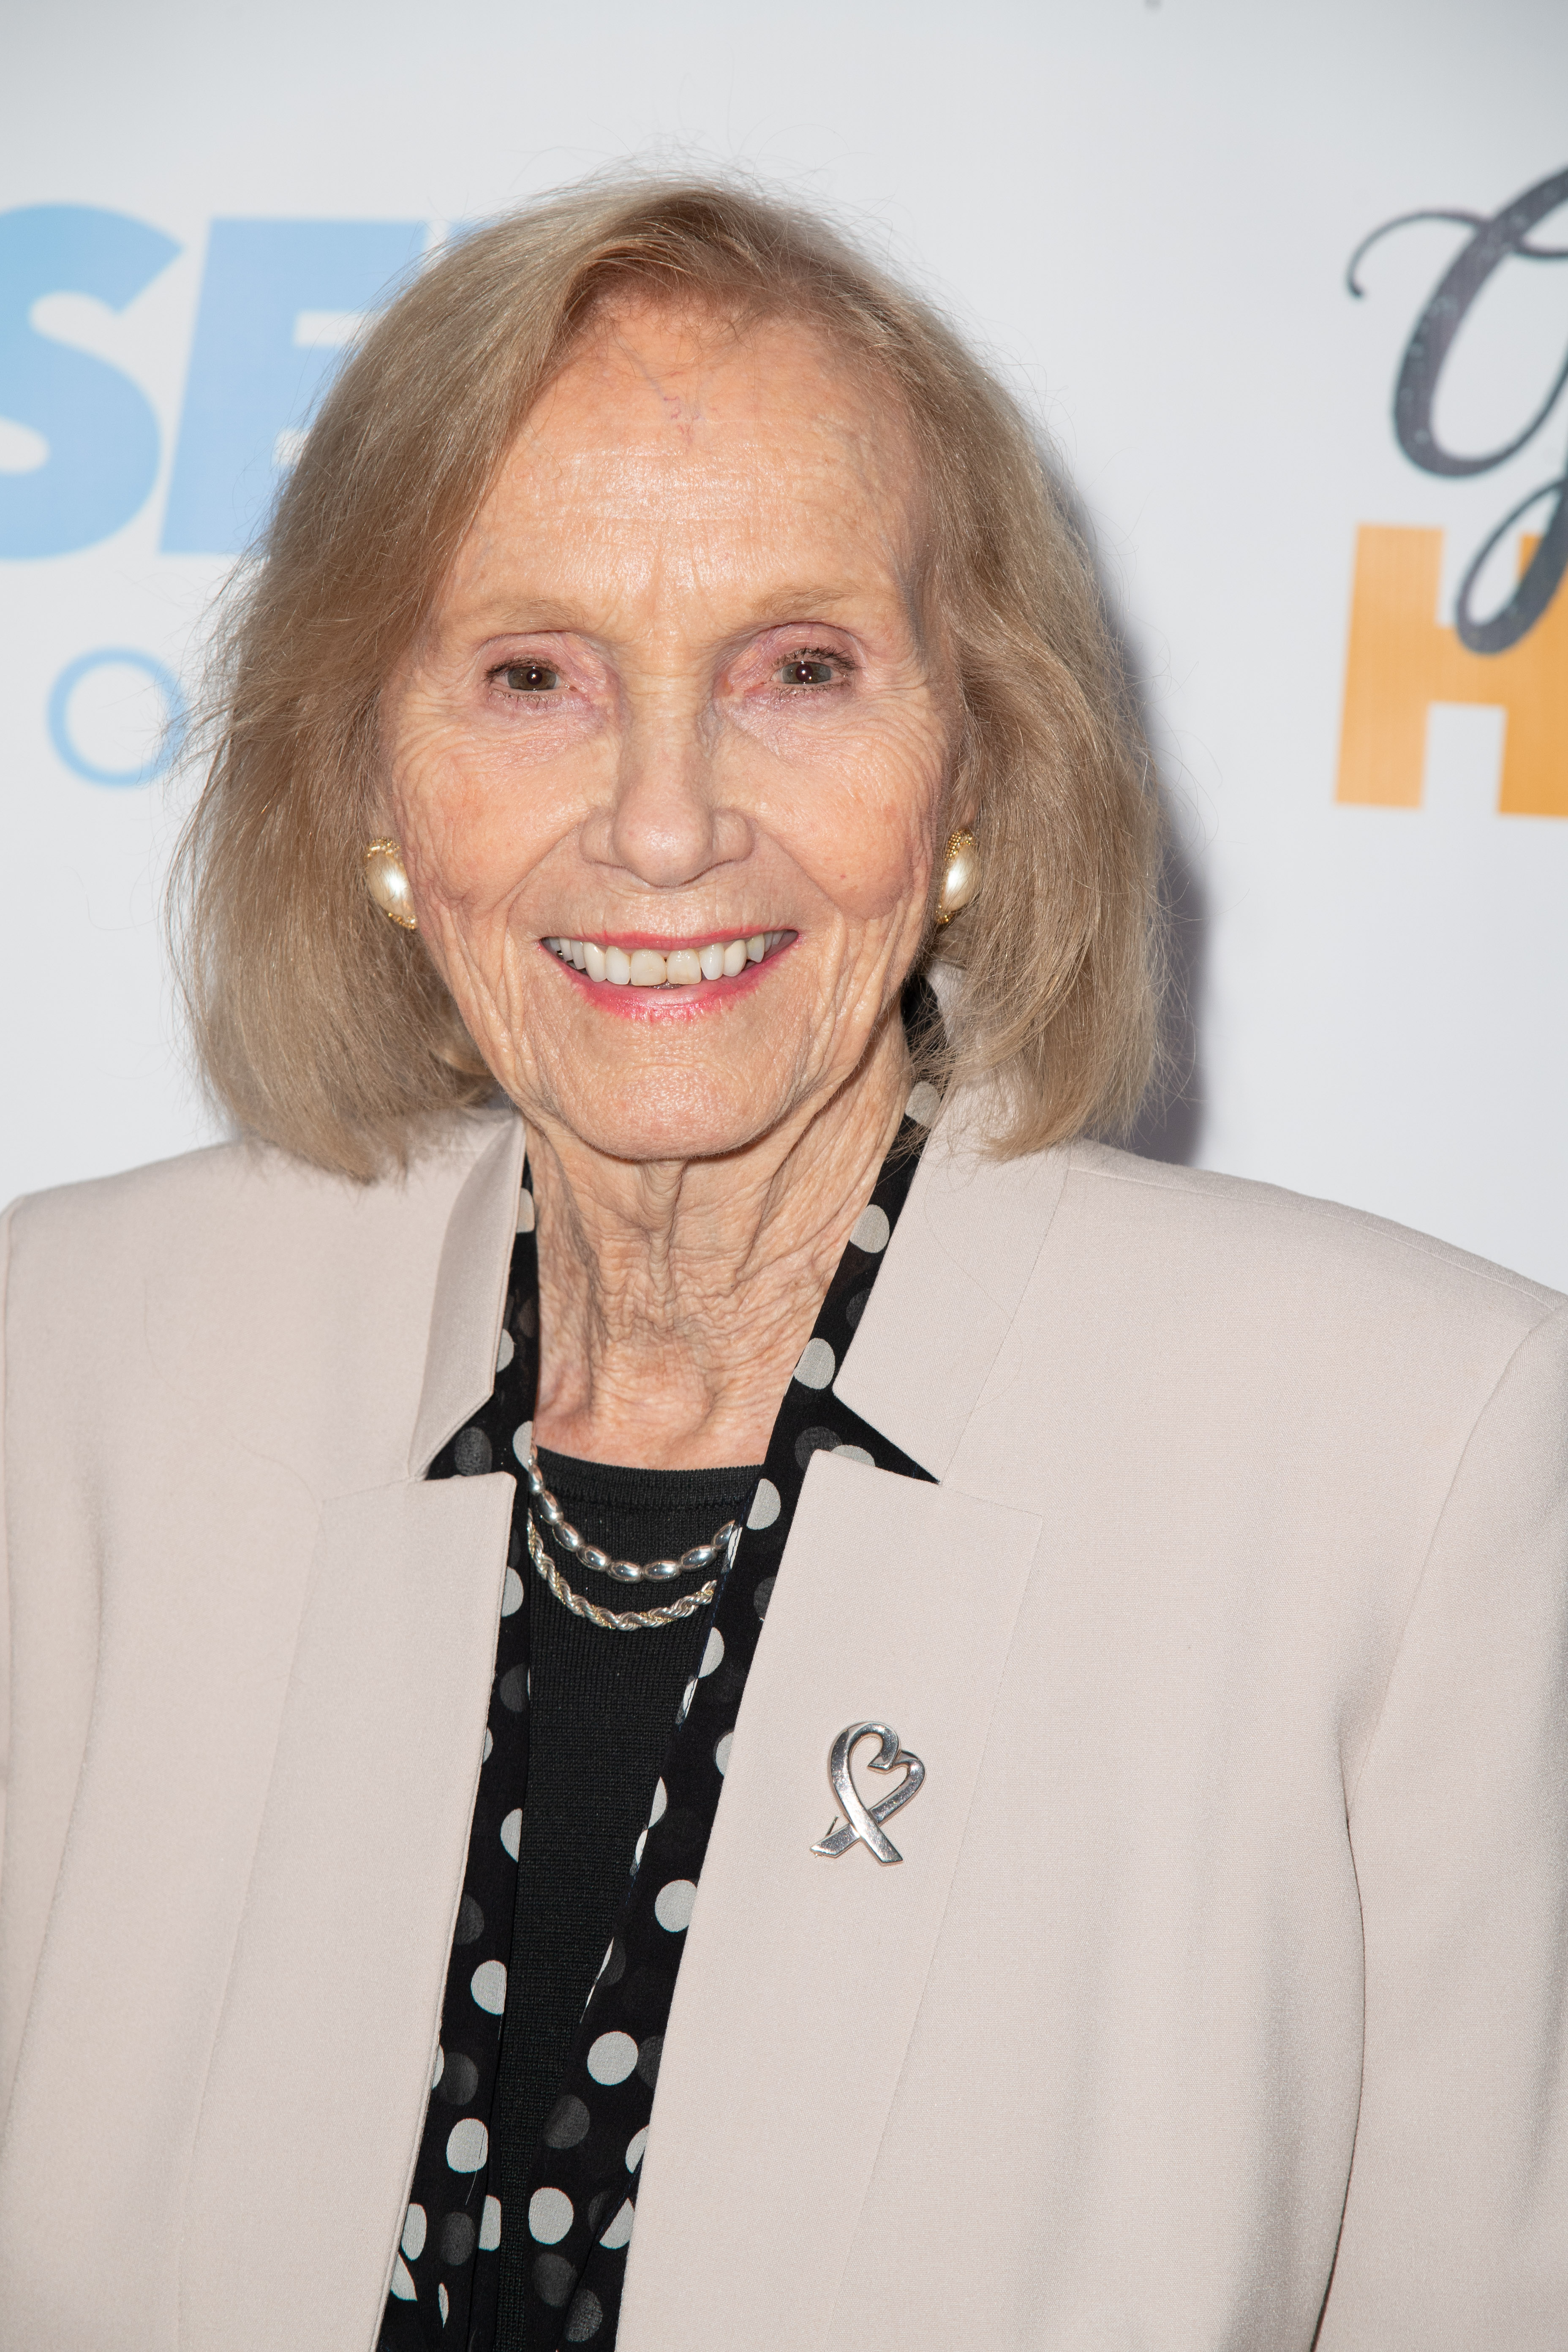 Eva Marie Saint at the opening night performance of "Sweet Charity" in Westwood, 2018 | Source: Getty Images